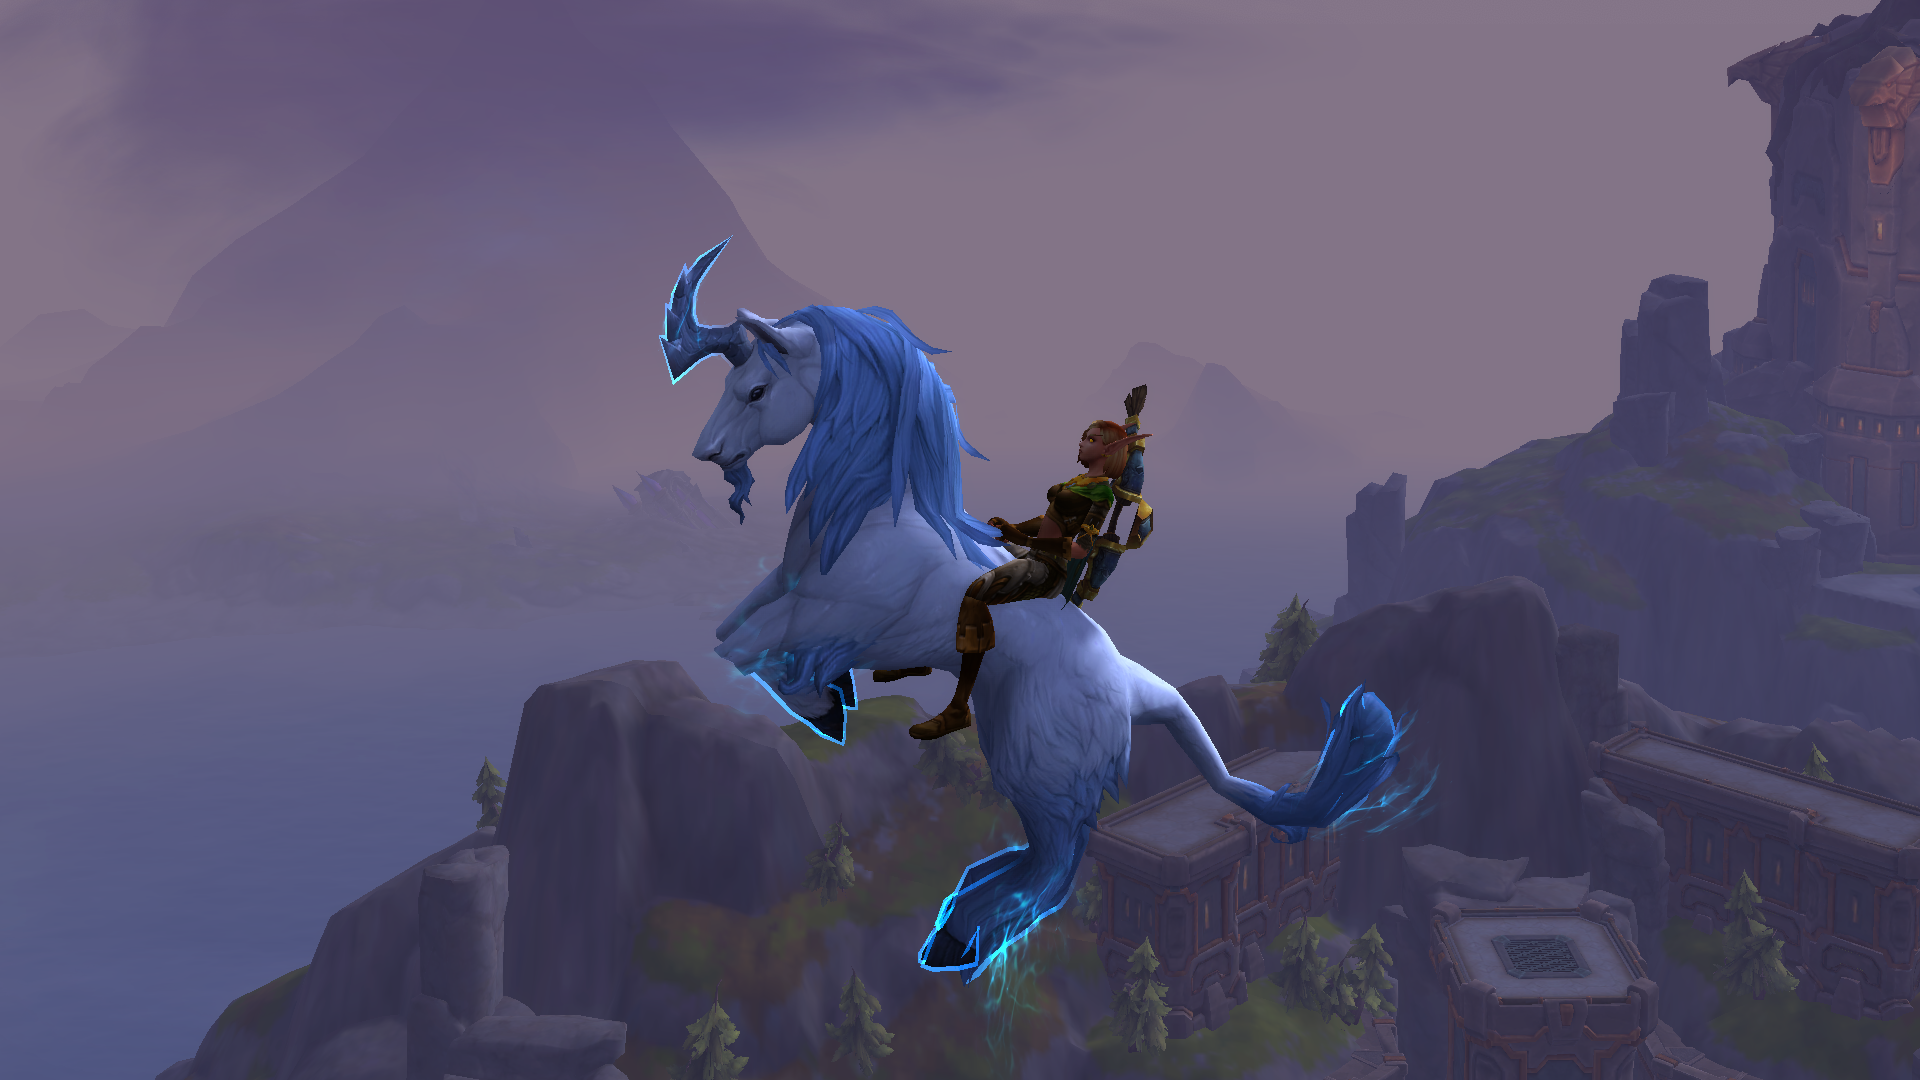 A hunter soars through the air on a unicorn in World of Warcraft: The War Within.